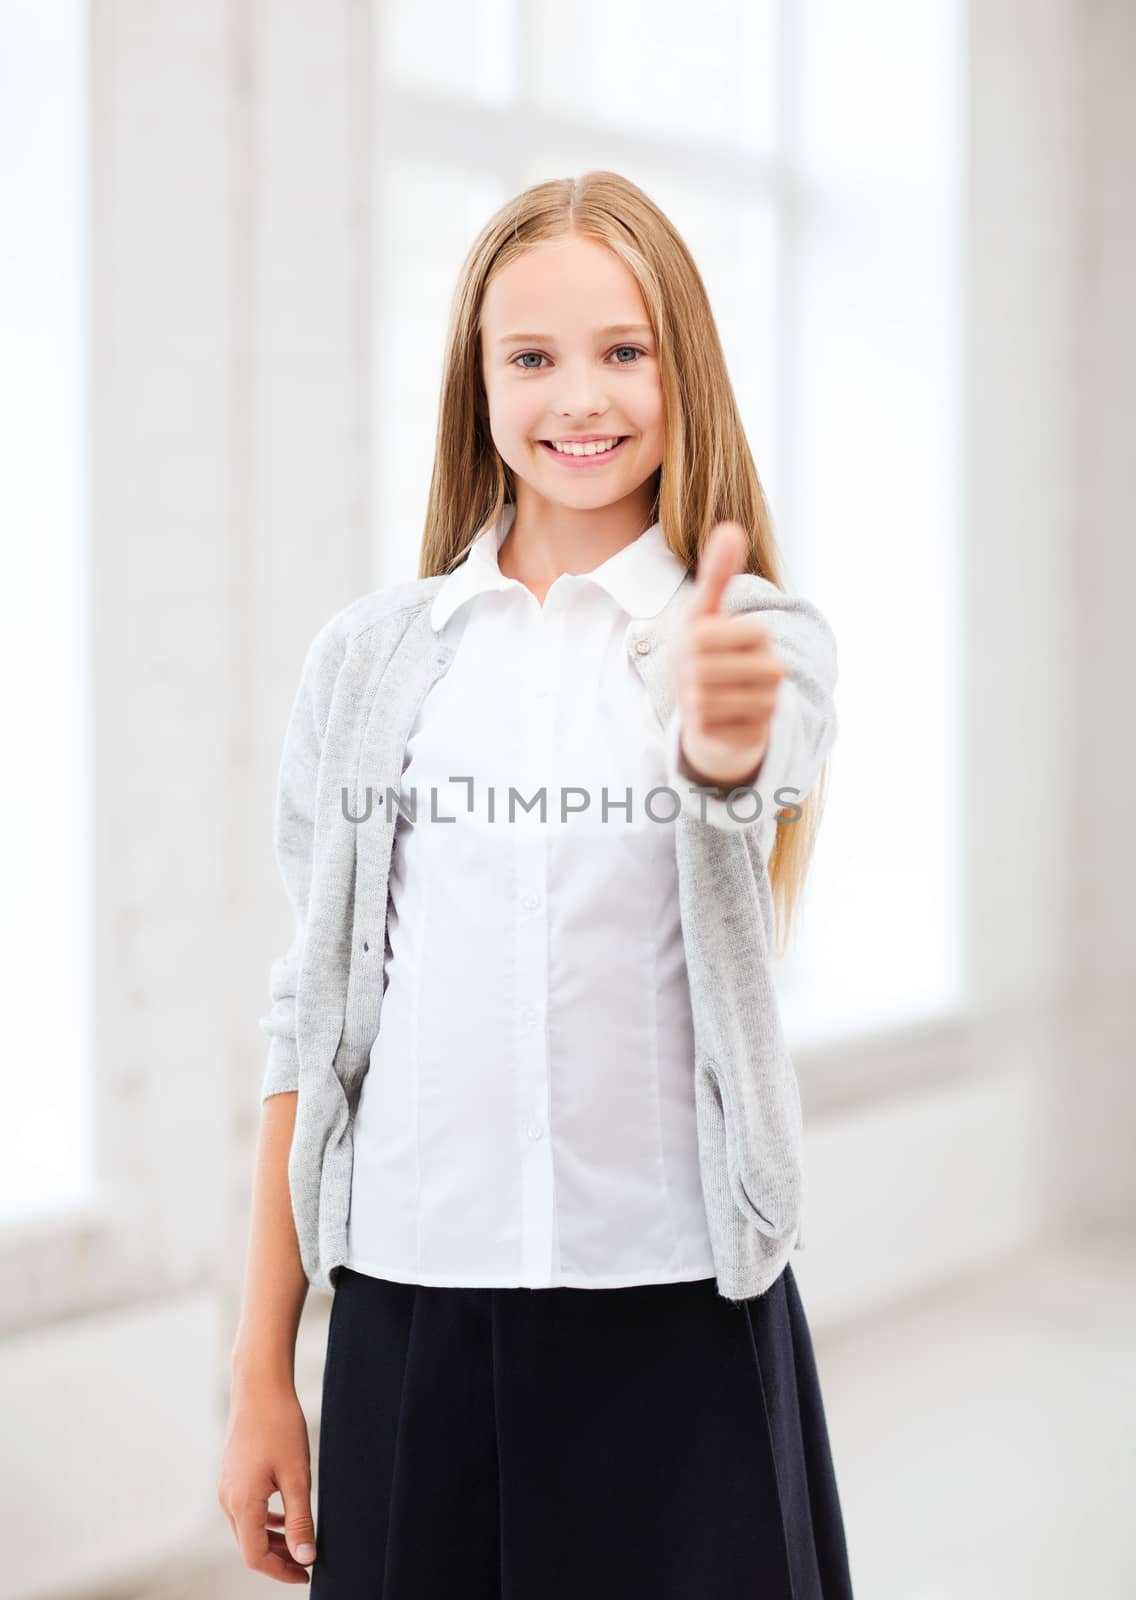 education and school concept - little student girl showing thumbs up at school